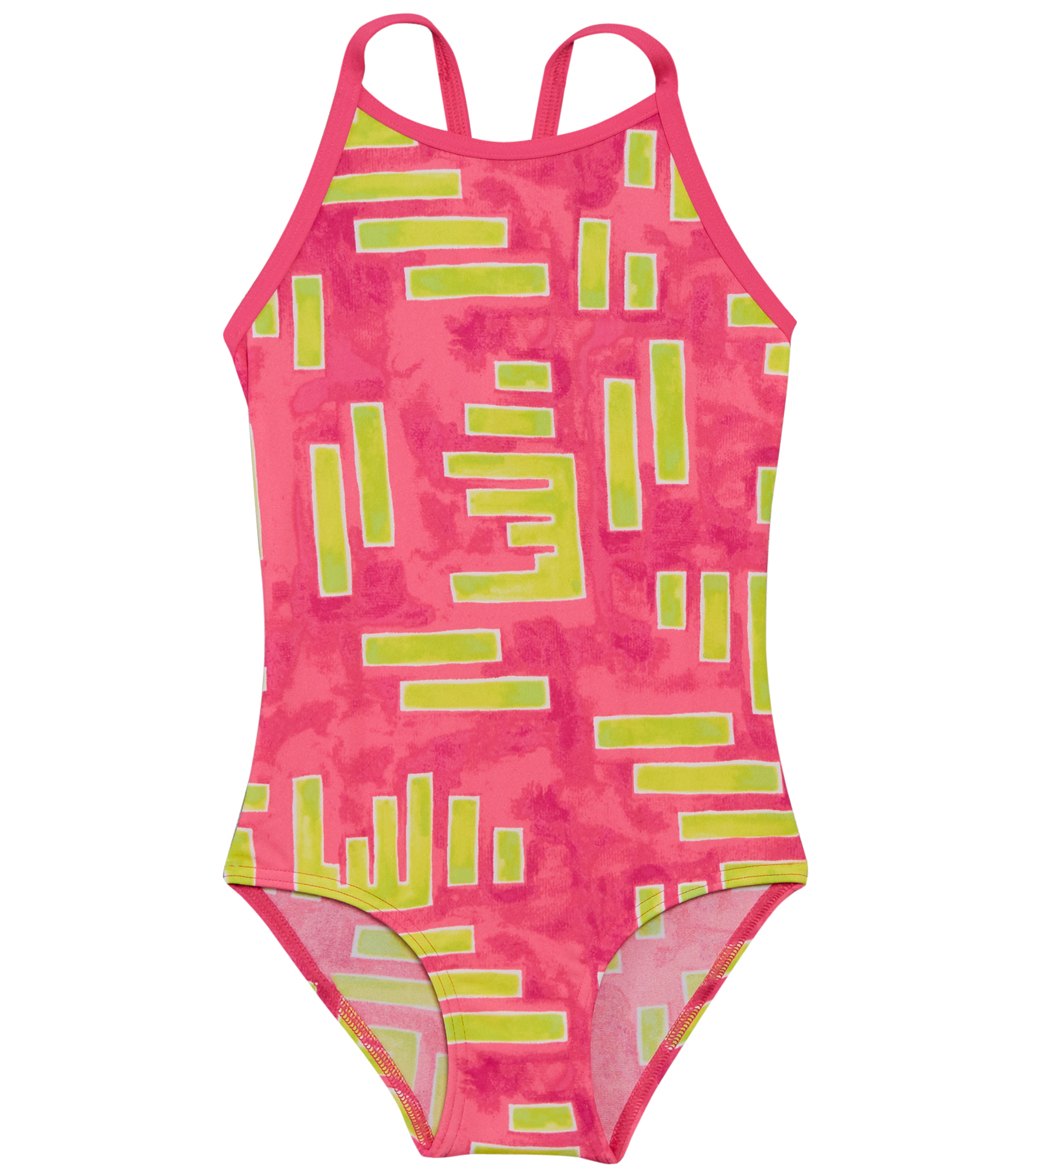 Funkita Toddler Girls' Bar Printed One Piece Swimsuit - Multi Pink 1 Polyester - Swimoutlet.com